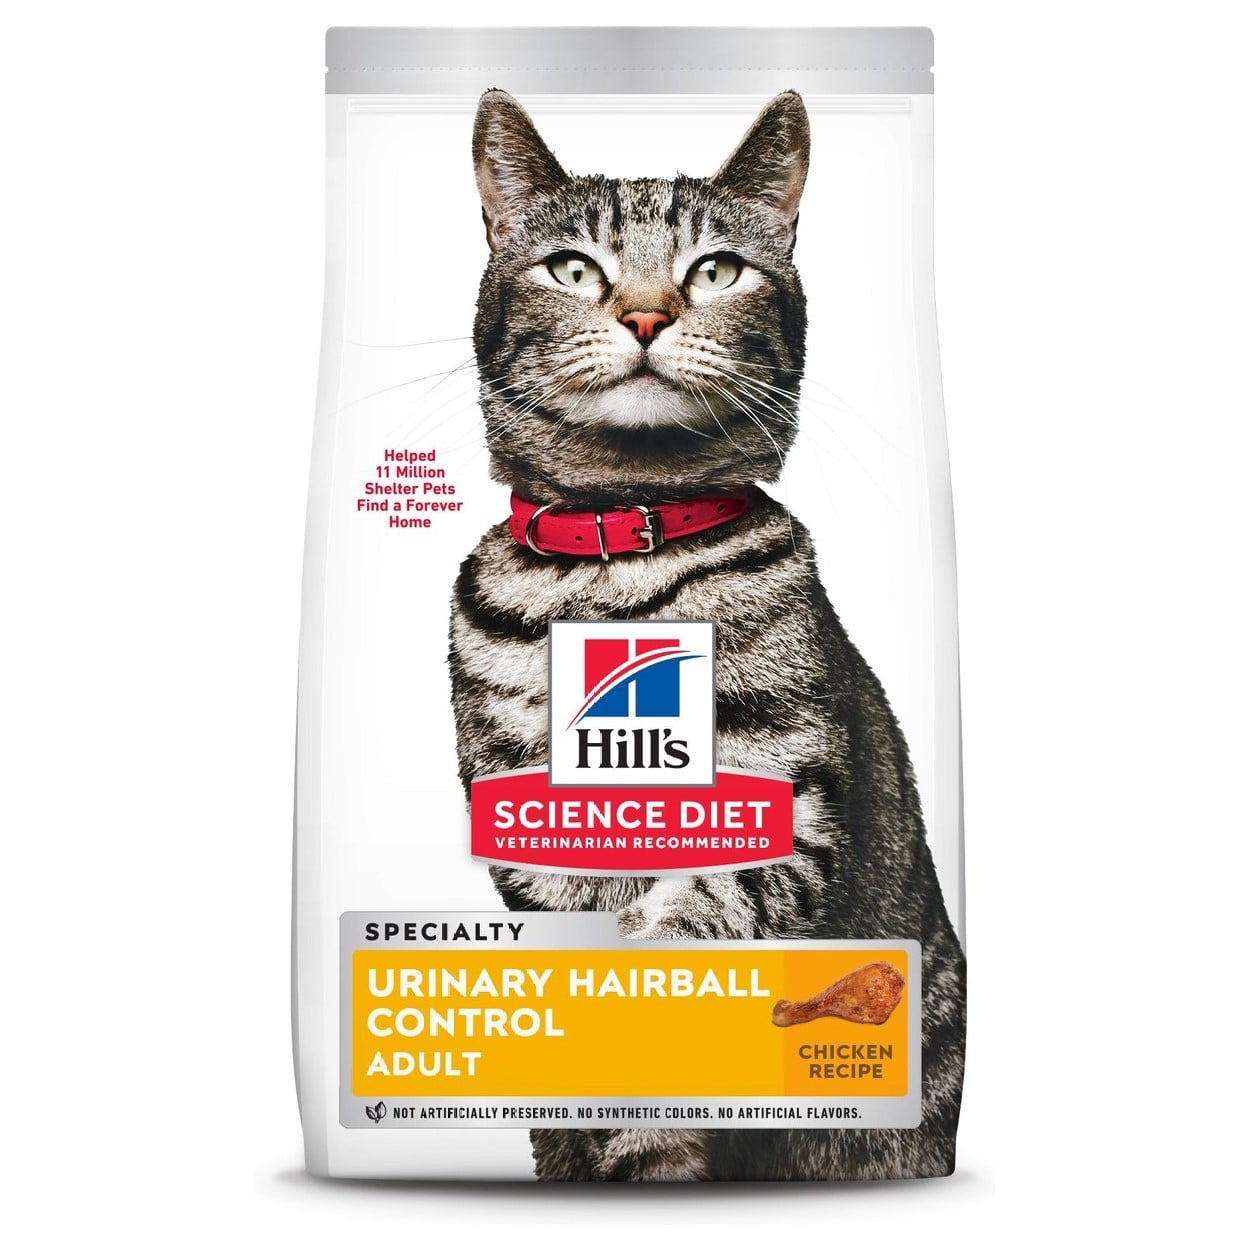 Hill's Science Diet Urinary Hairball Control Adult, Dry Cat Food